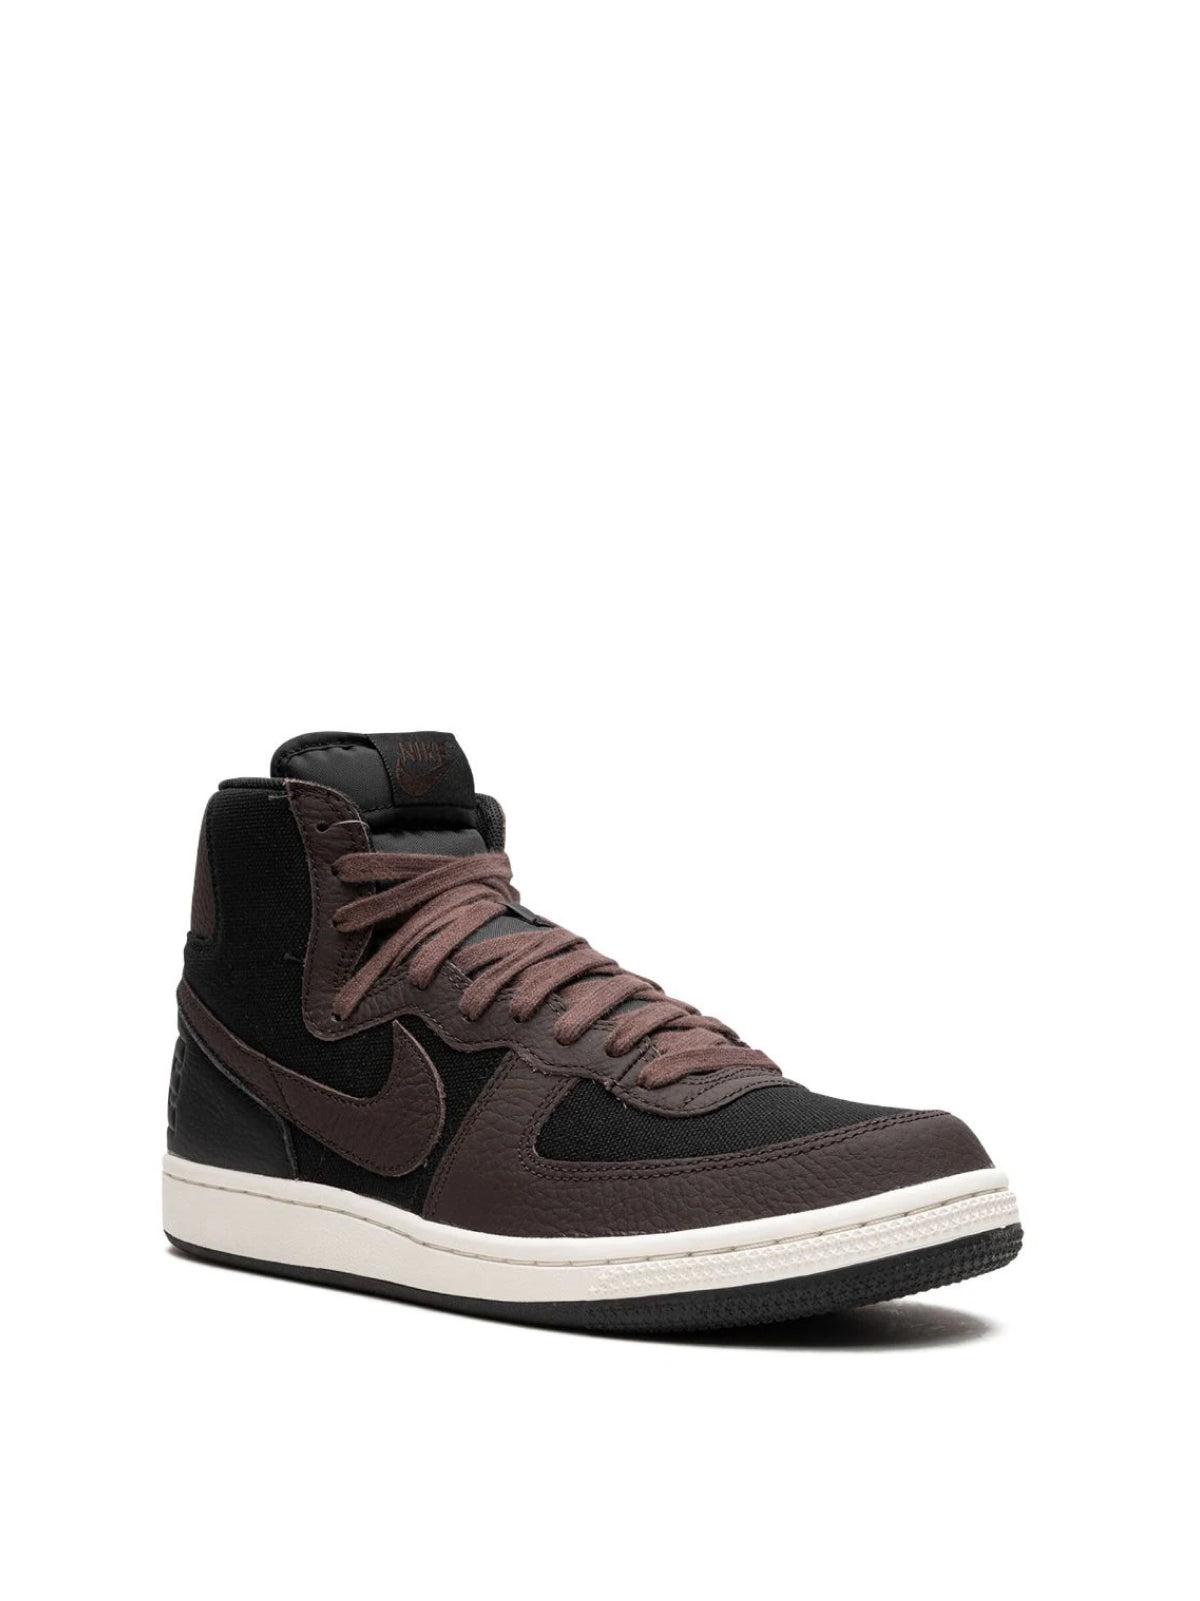 Nike-OUTLET-SALE-Terminator High SE Sneakers-ARCHIVIST